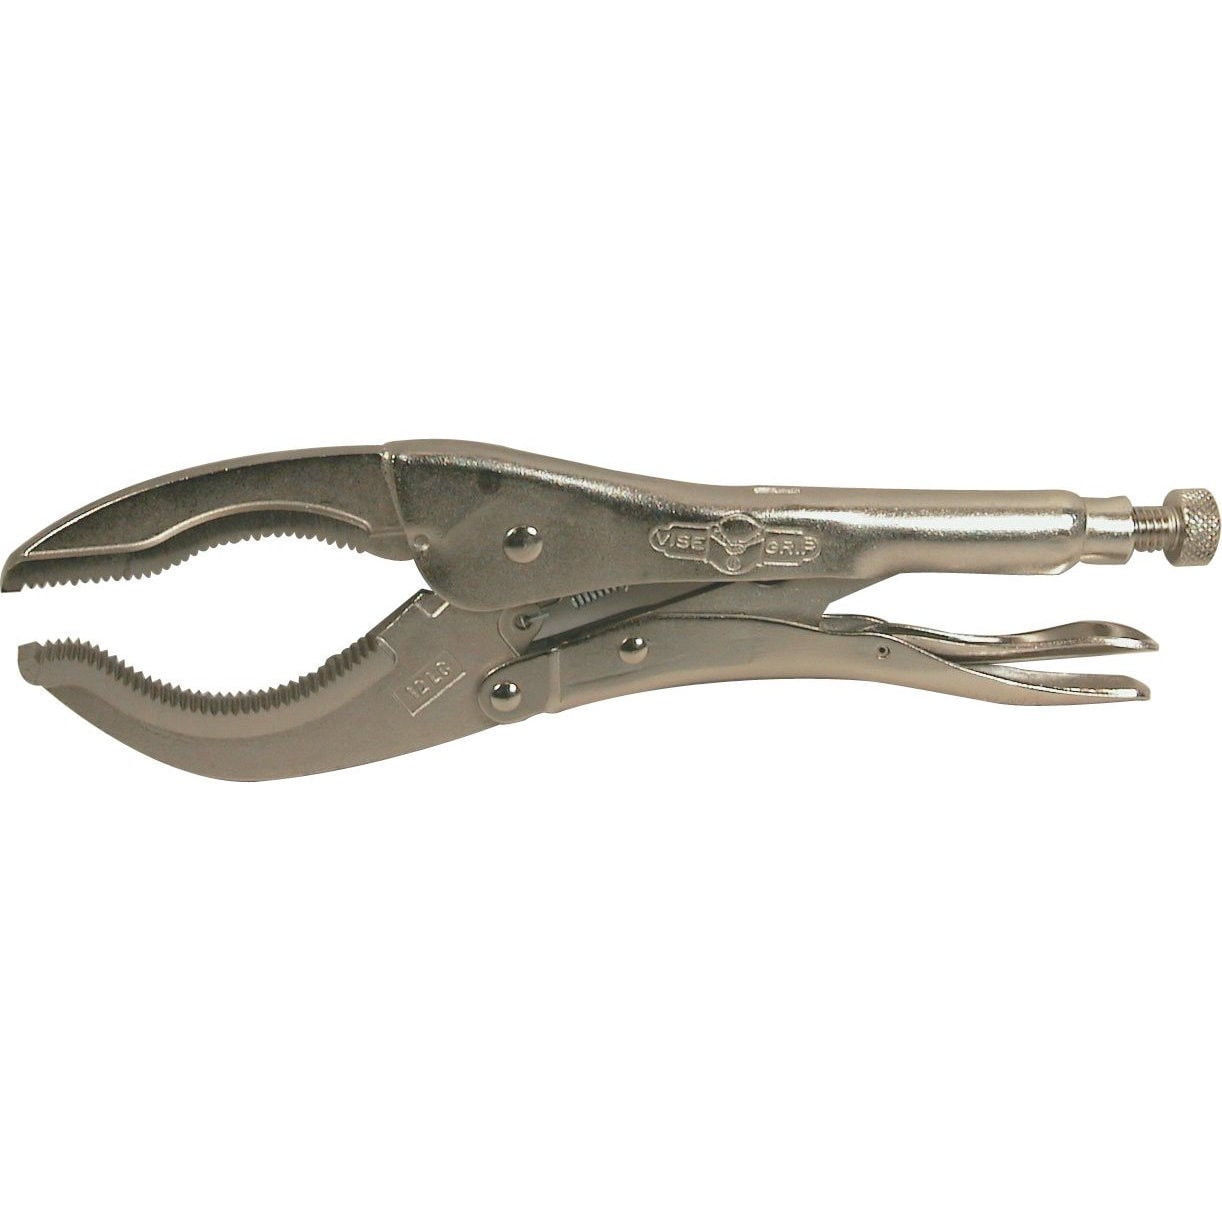 15" Locking Pliers Bent Jaw 45 Degree Extra Long for Gripping Clamping Twisting 